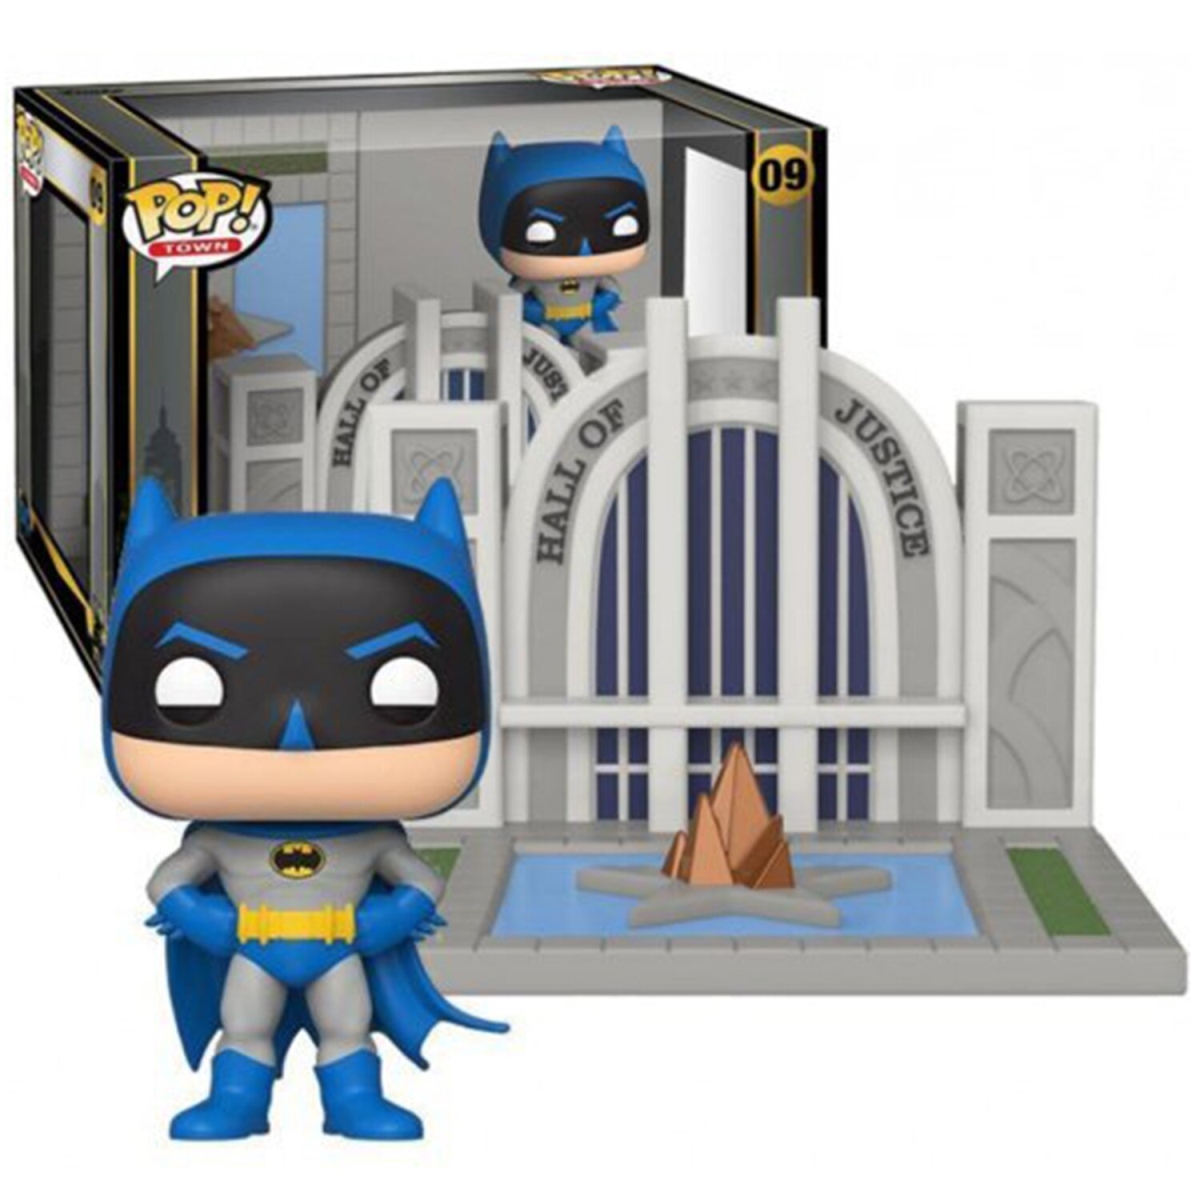 Funko 304441 21 x 26 x 15 cm Pop Towns Batman 80th Hall of Justice with Batman Toy Figures